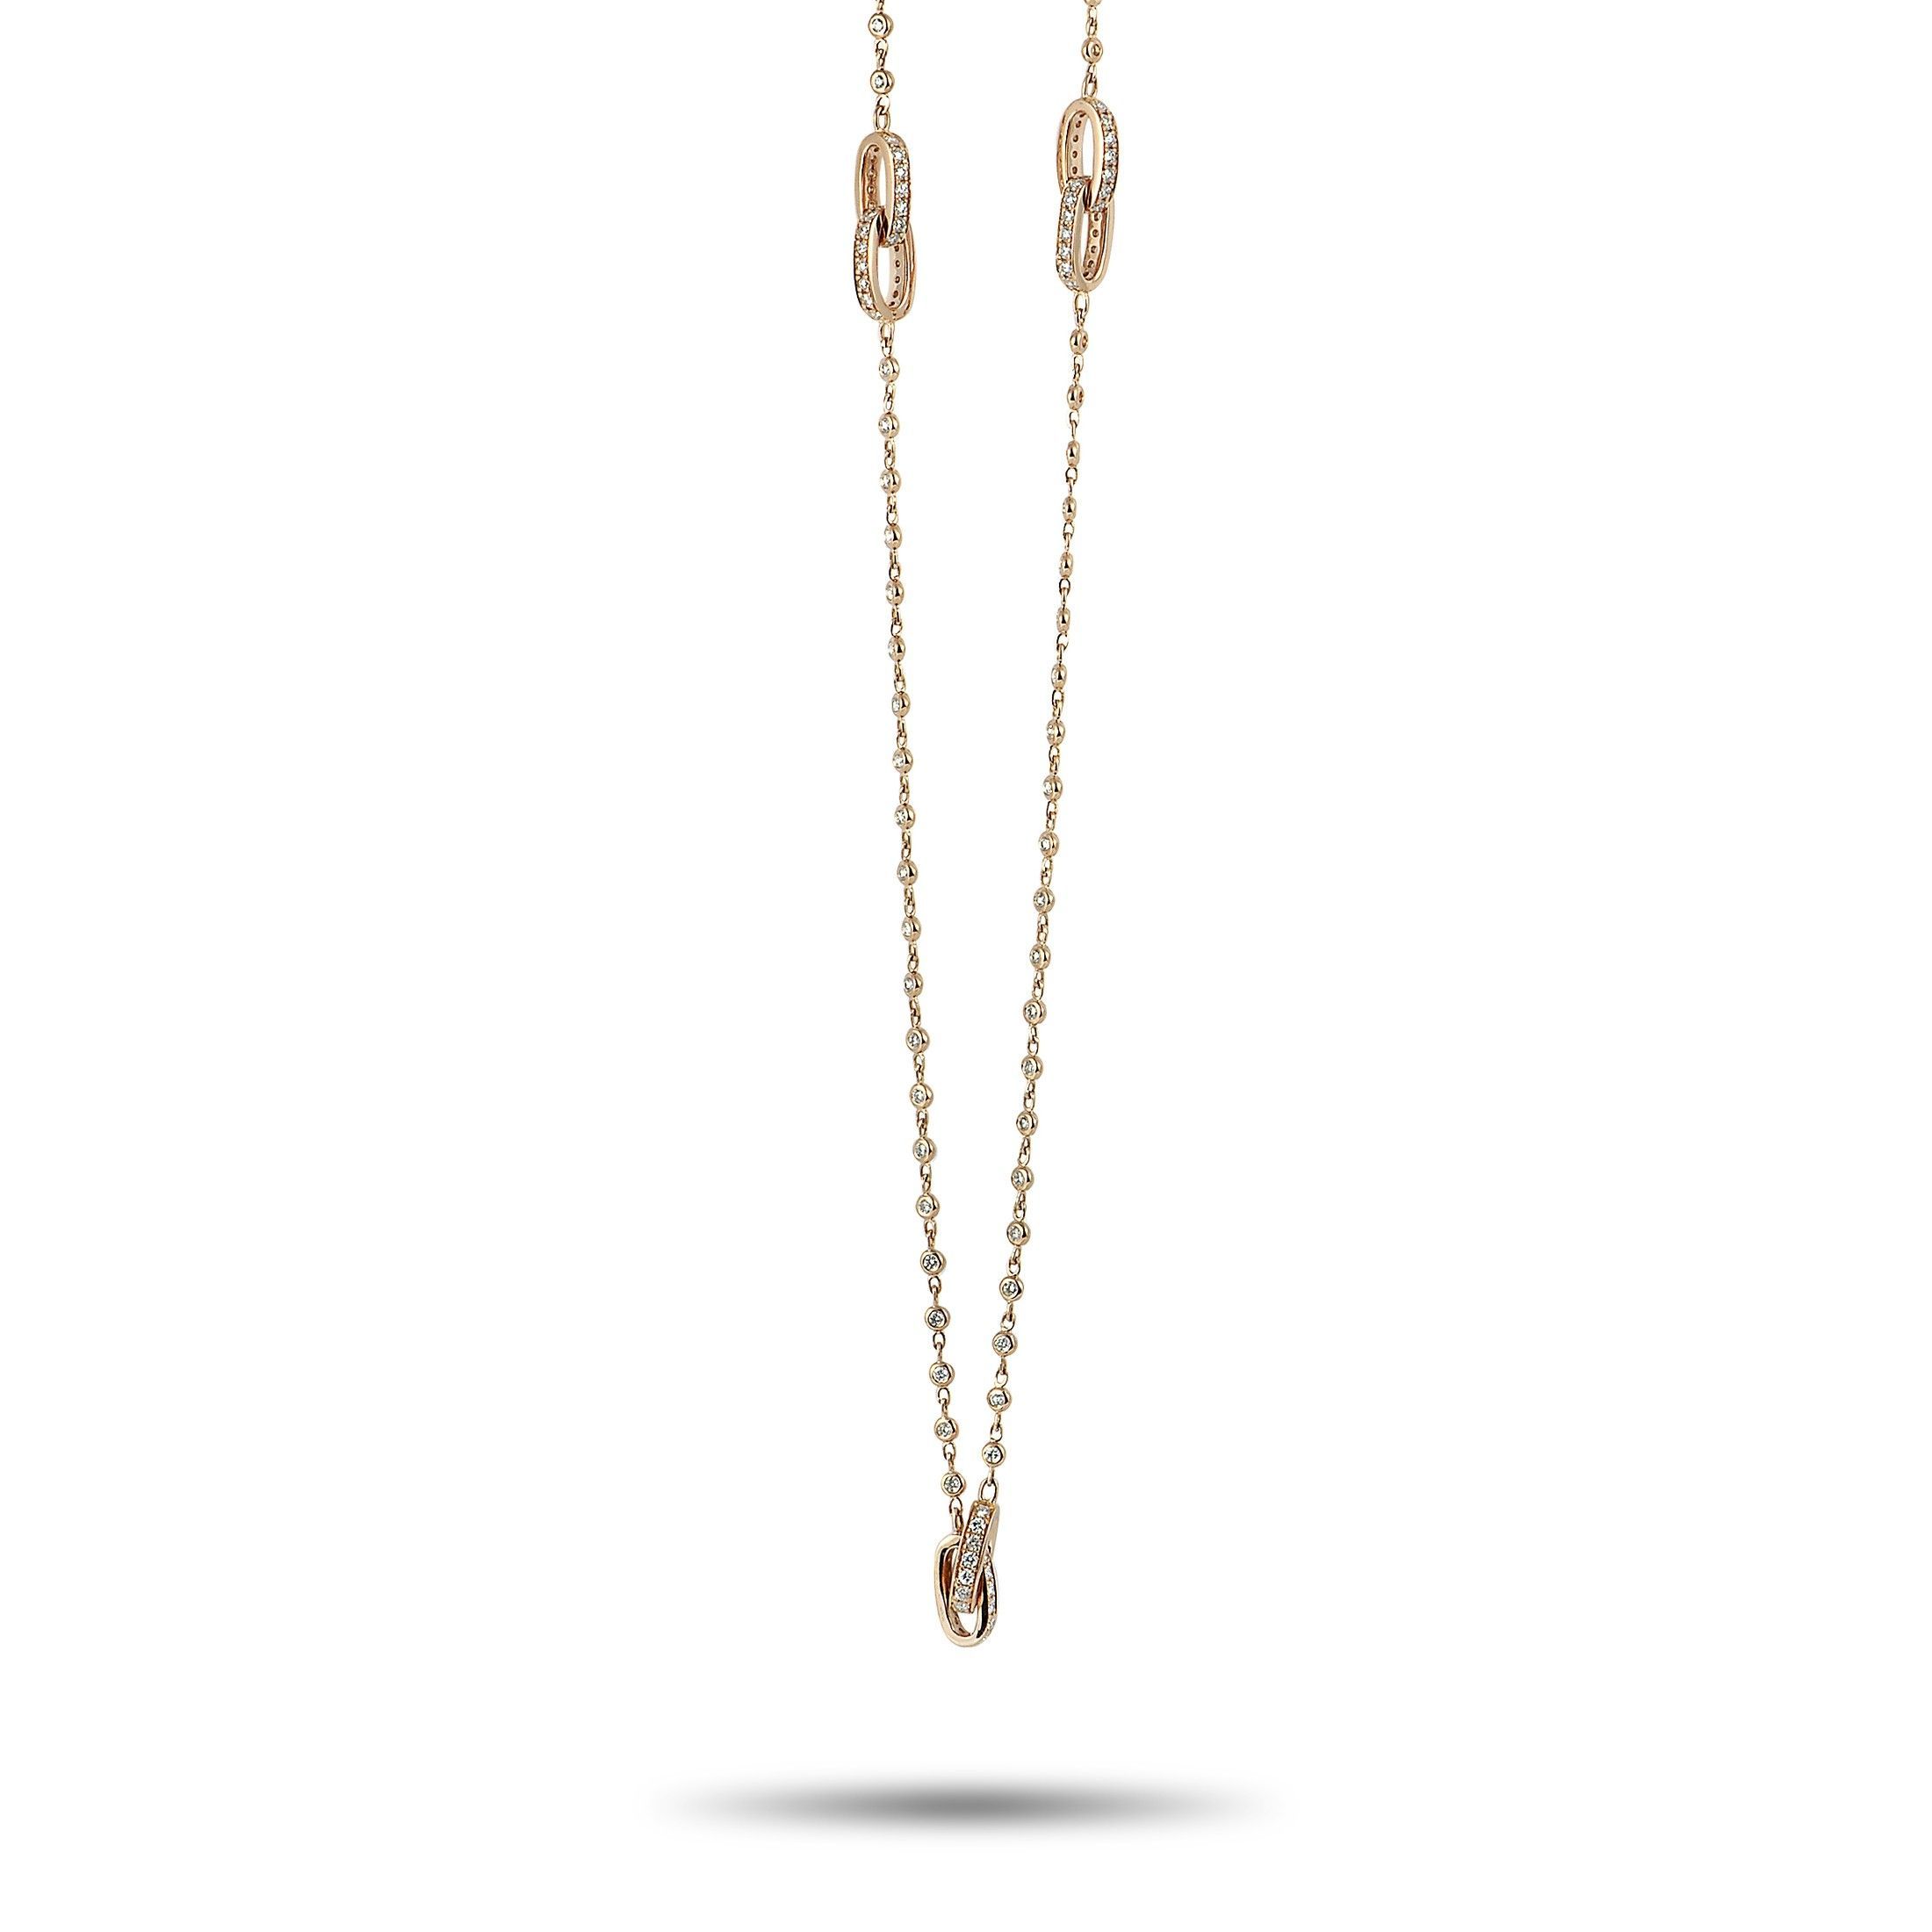 Lb Exclusive 18k Rose Gold Diamond Pave 10 Oval Long Sautoir Necklace Pertaining To 2019 Diamond Sautoir Necklaces In Platinum (View 24 of 25)